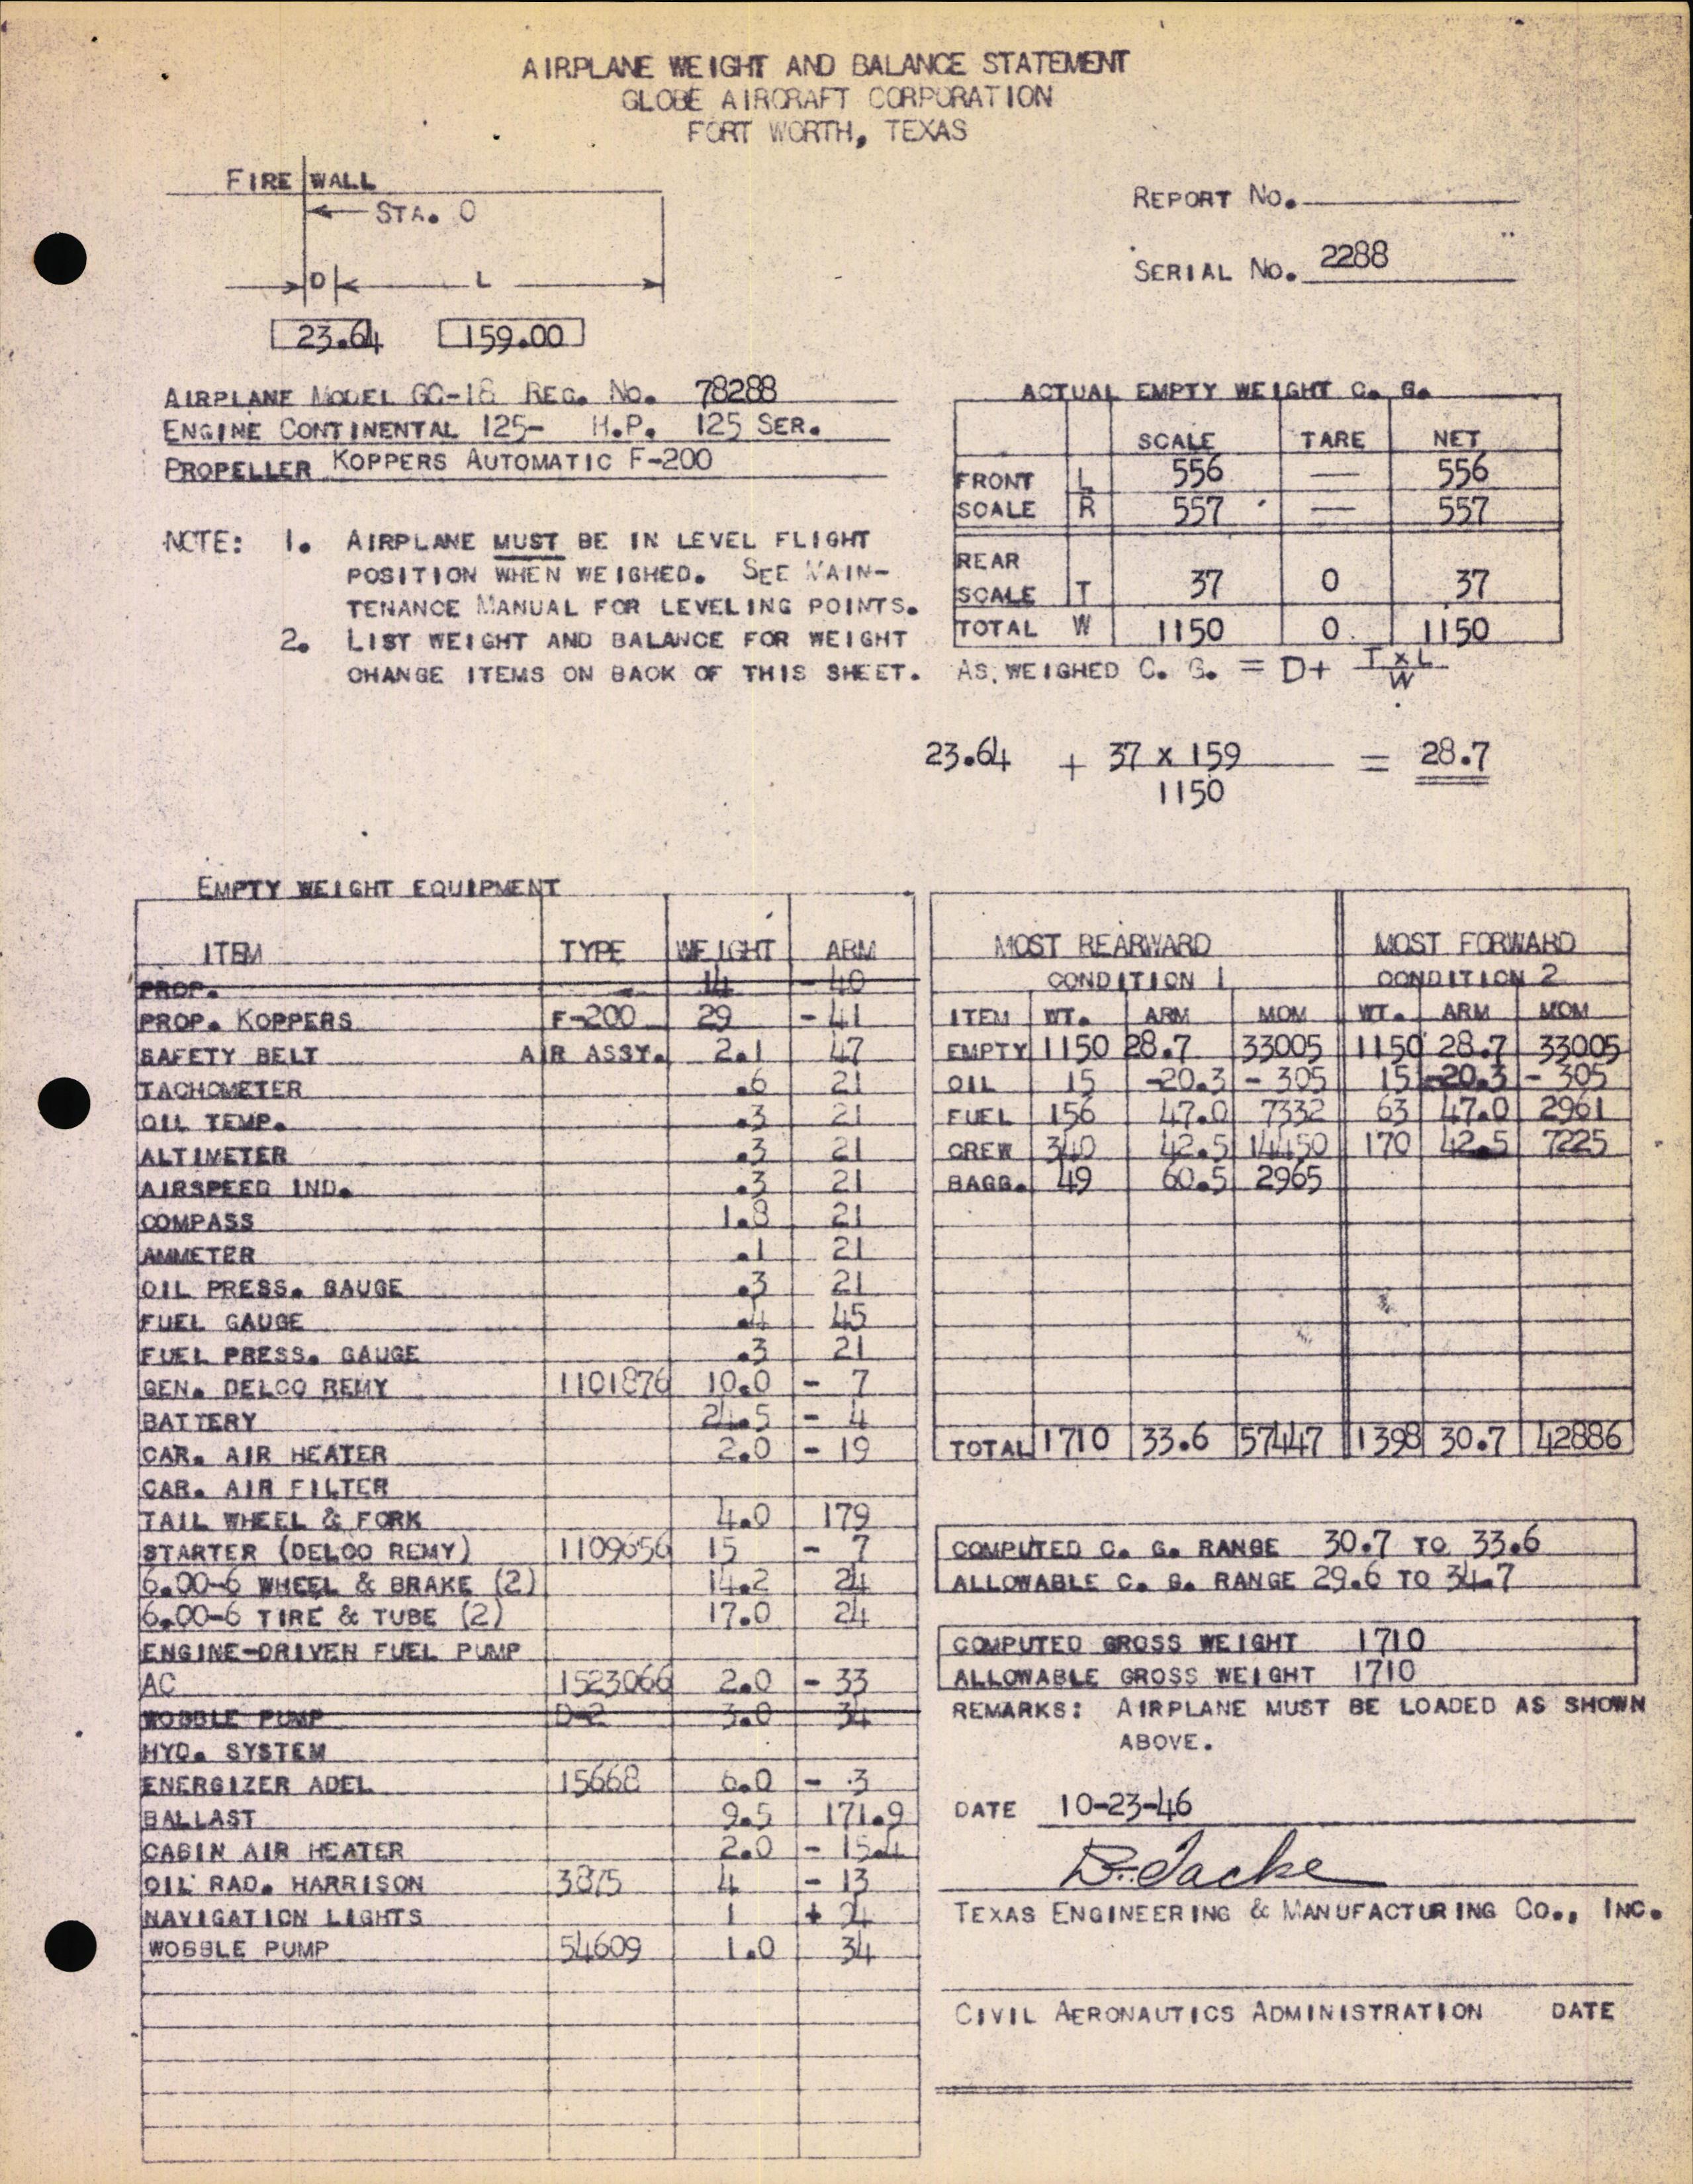 Sample page 4 from AirCorps Library document: Technical Information for Serial Number 2288